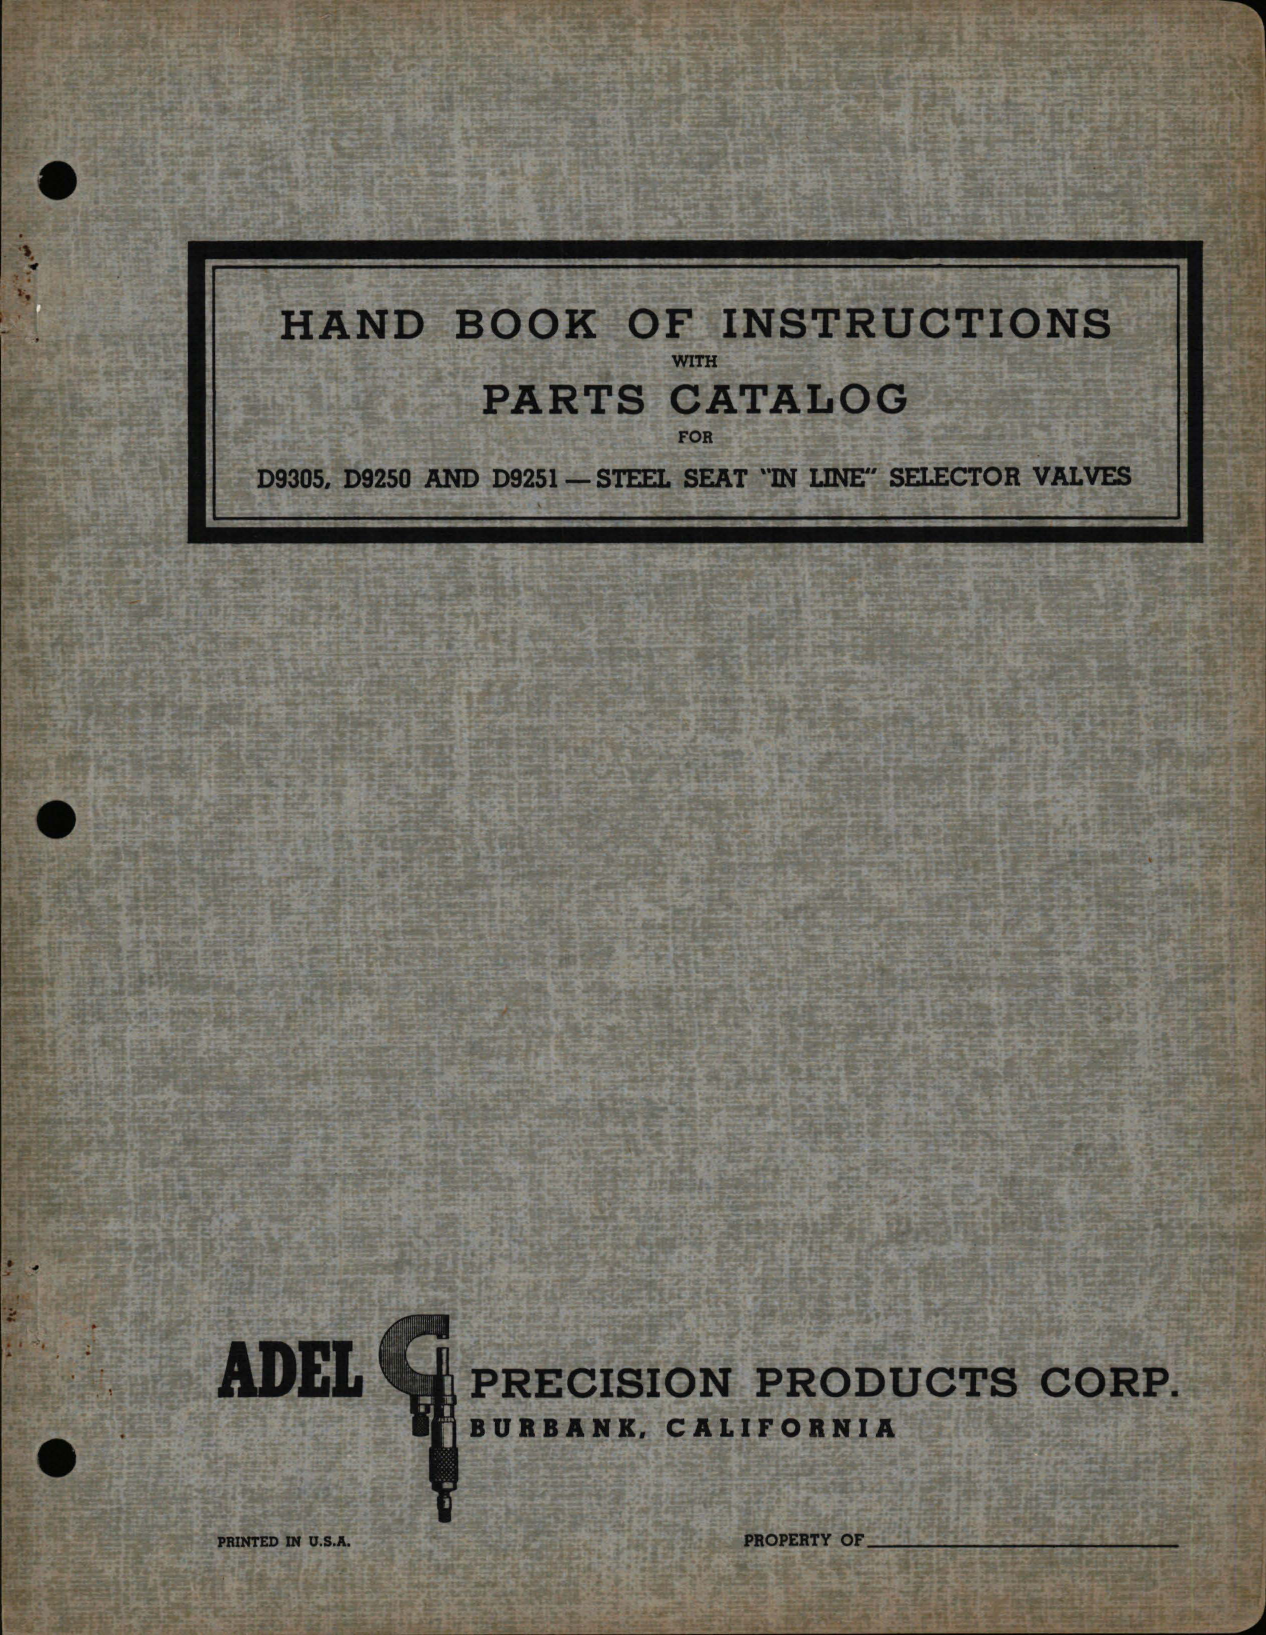 Sample page 1 from AirCorps Library document: Instructions with Parts Catalog for Steel Seat In Line Selector Valves - D9305, D9250, and D9251 